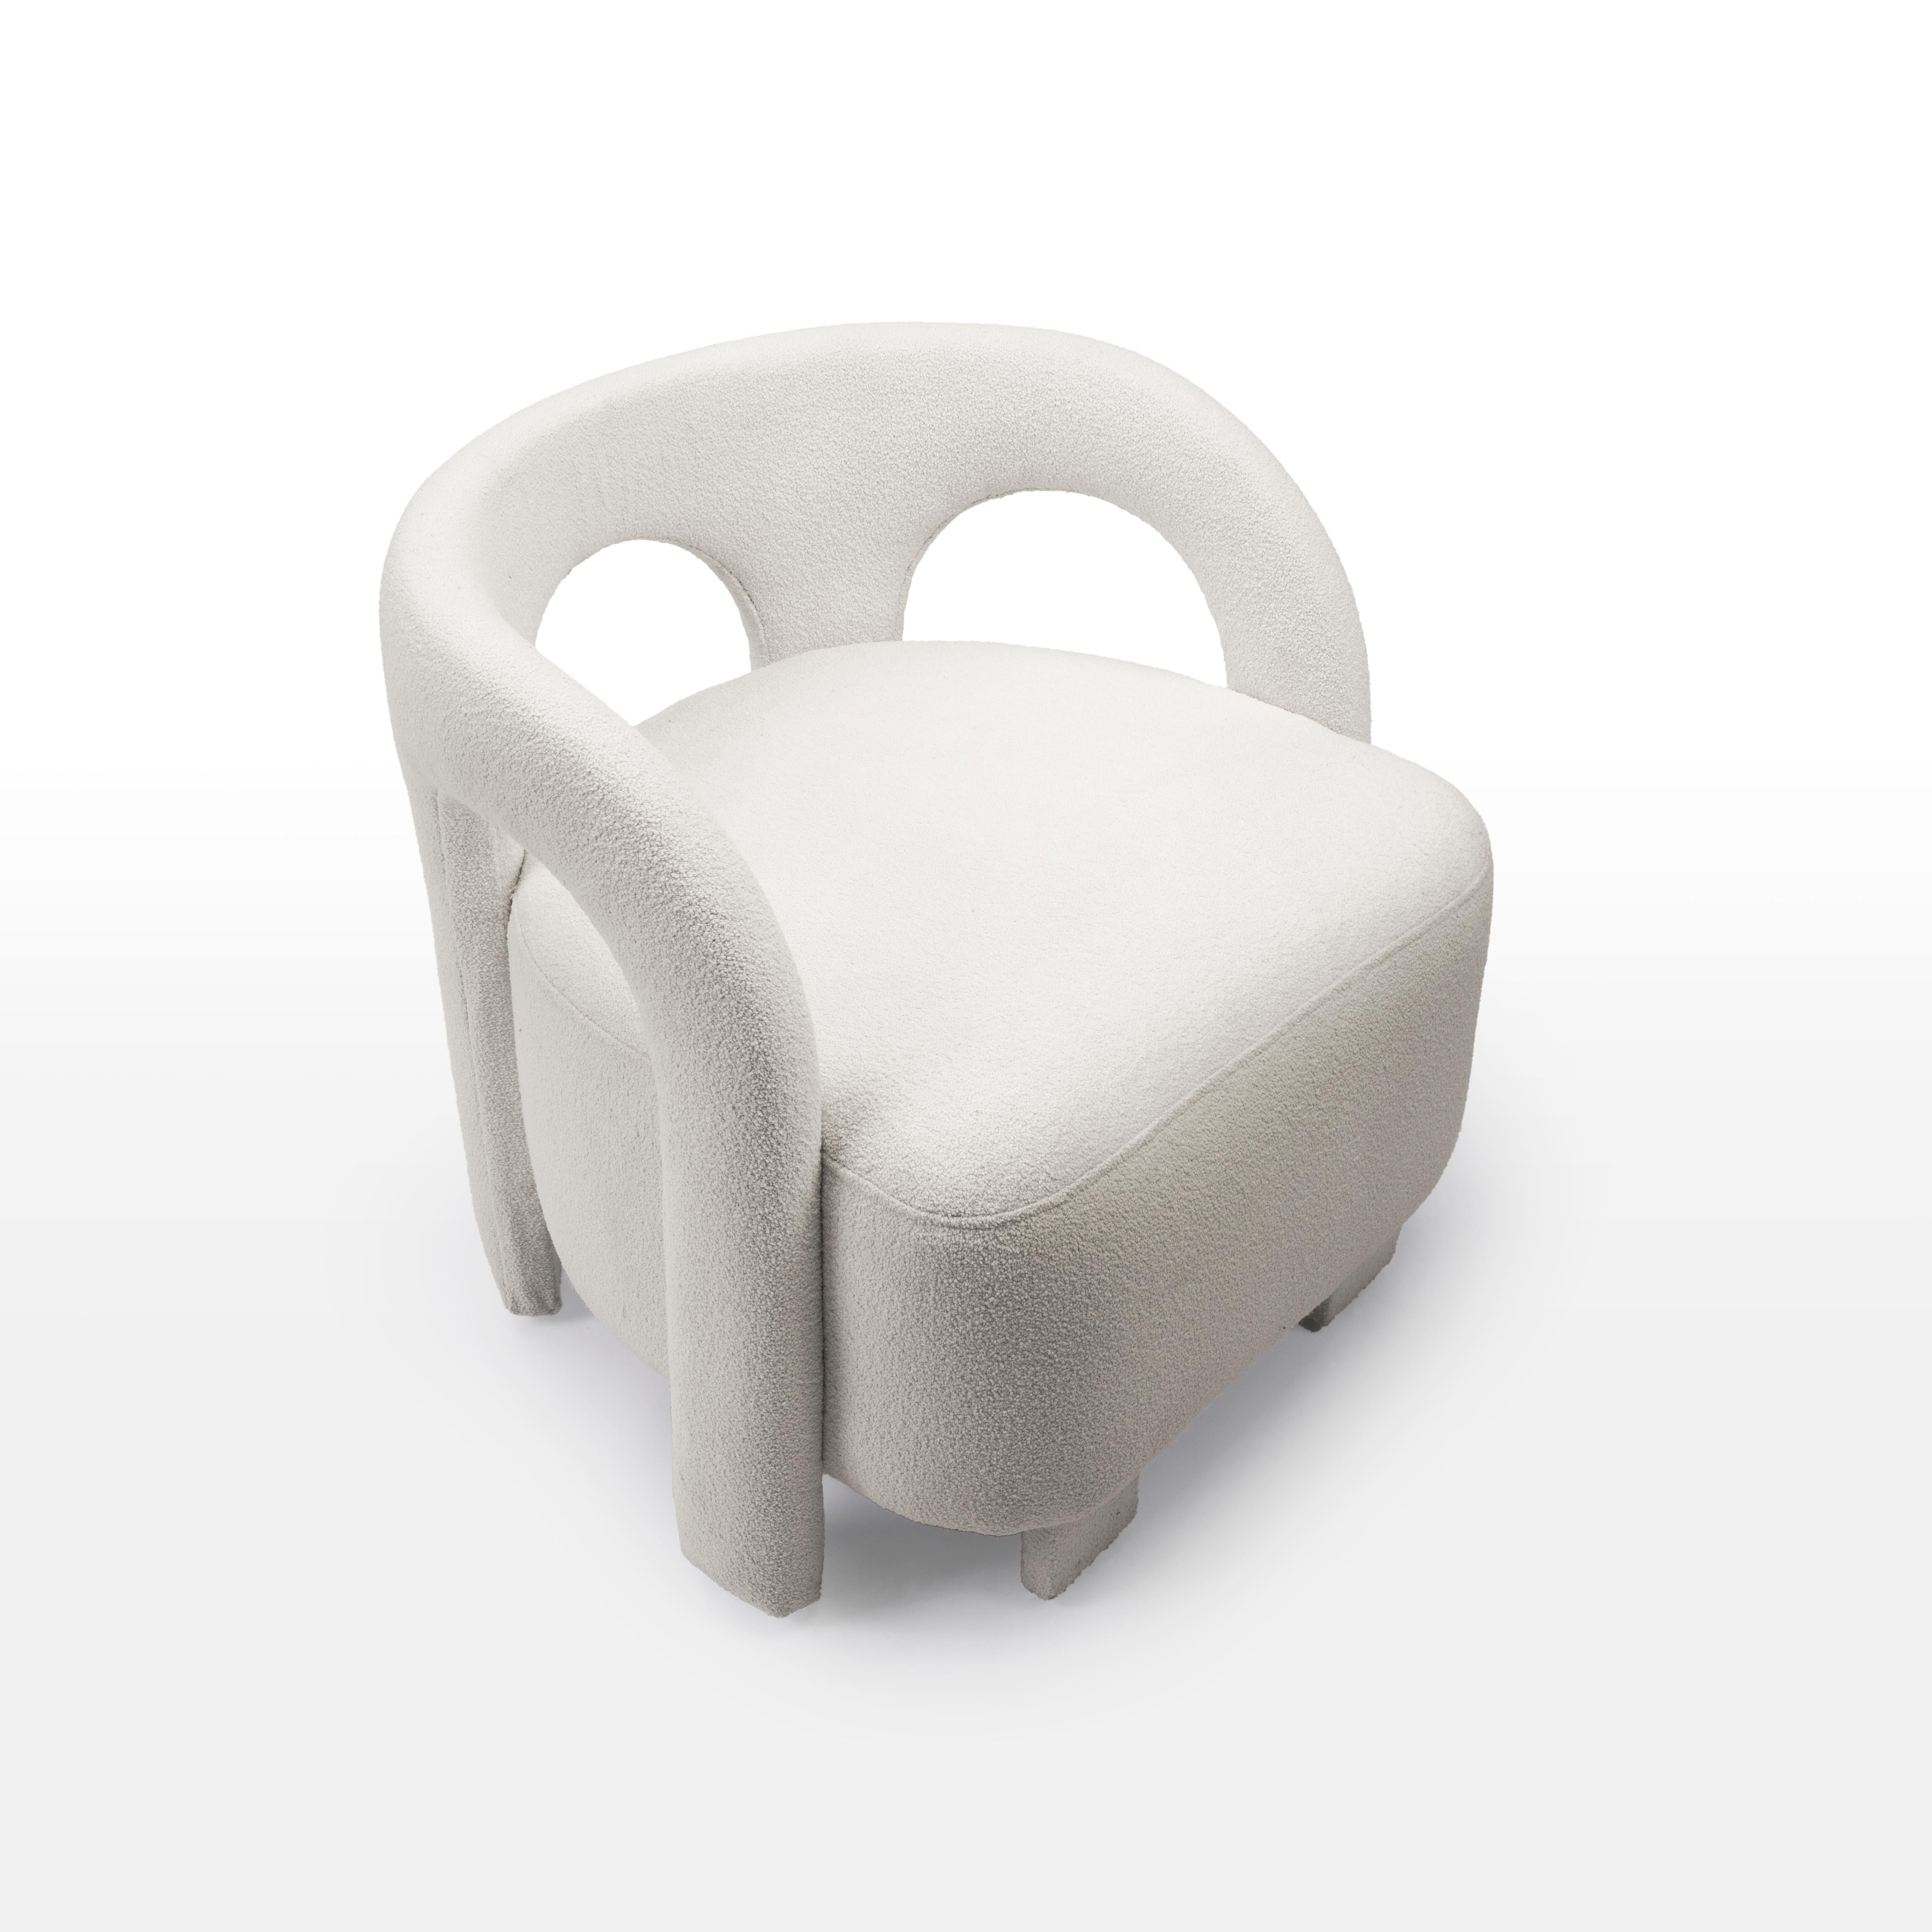 Egyptian White Curvy Upholstered Armchair Inspired by Egypt's Nubian Architecture For Sale